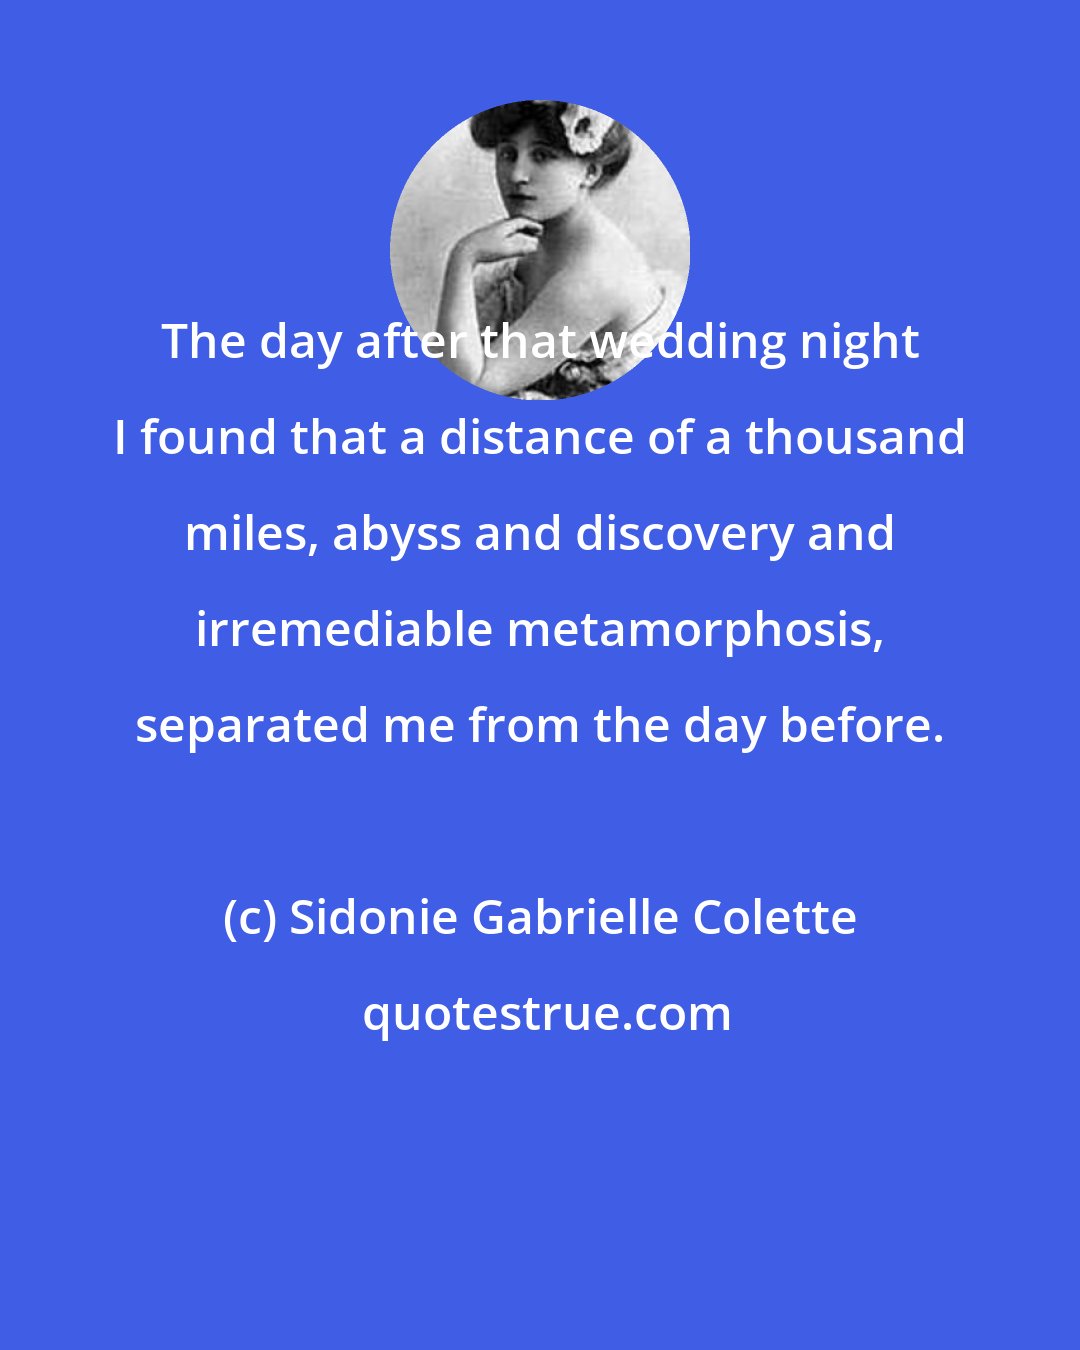 Sidonie Gabrielle Colette: The day after that wedding night I found that a distance of a thousand miles, abyss and discovery and irremediable metamorphosis, separated me from the day before.